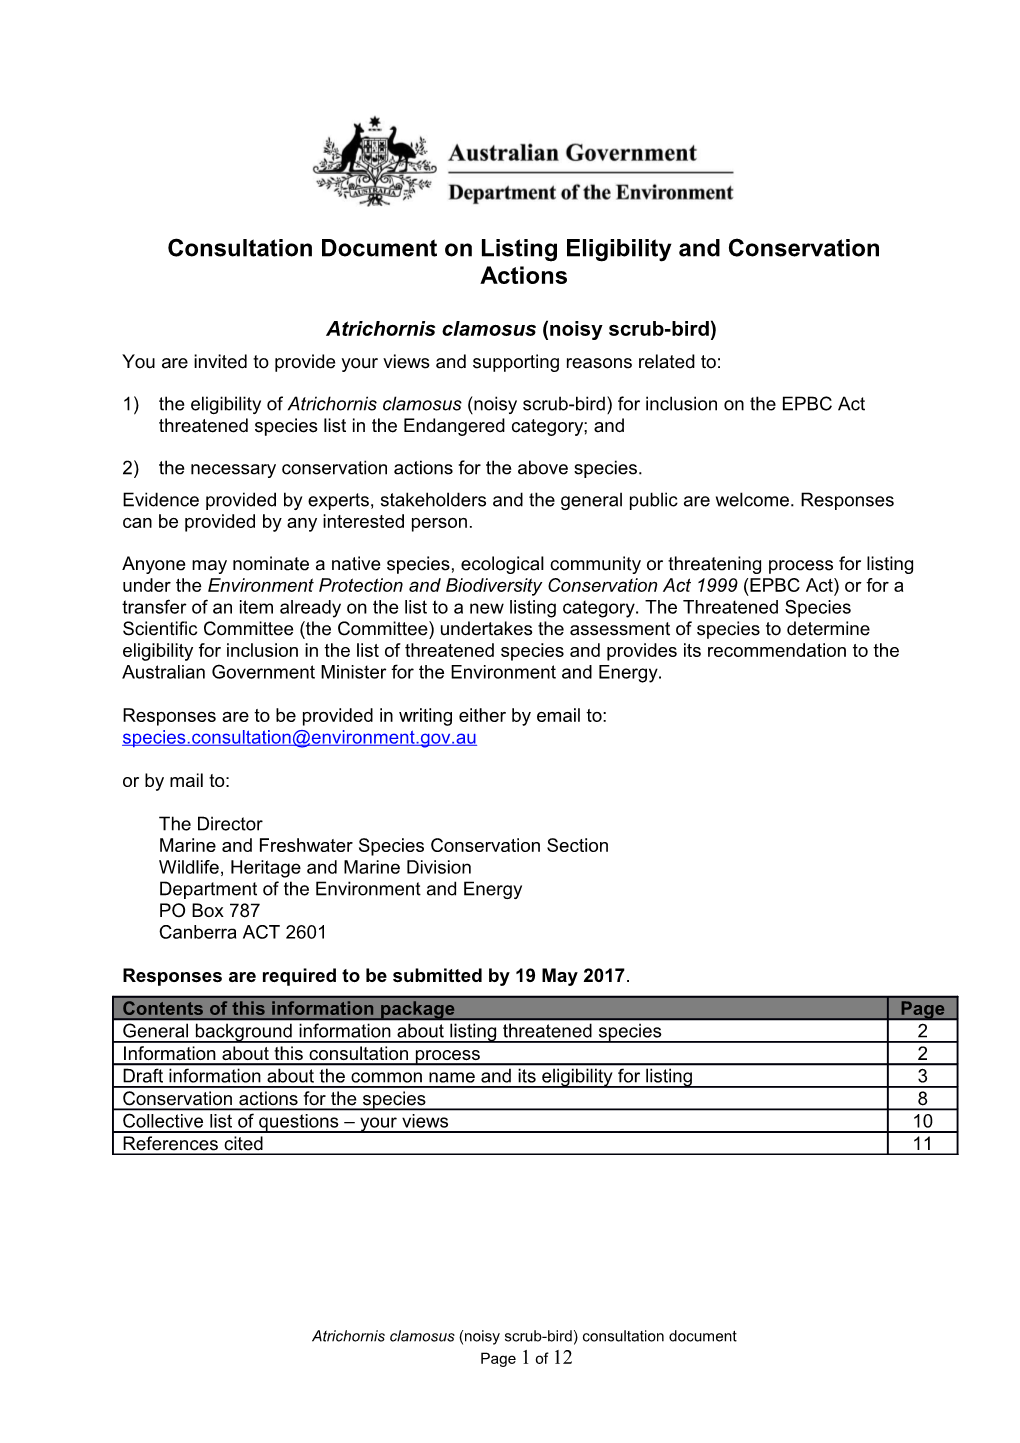 Consultation Document on Listing Eligibility and Conservation Actions Atrichornis Clamosus